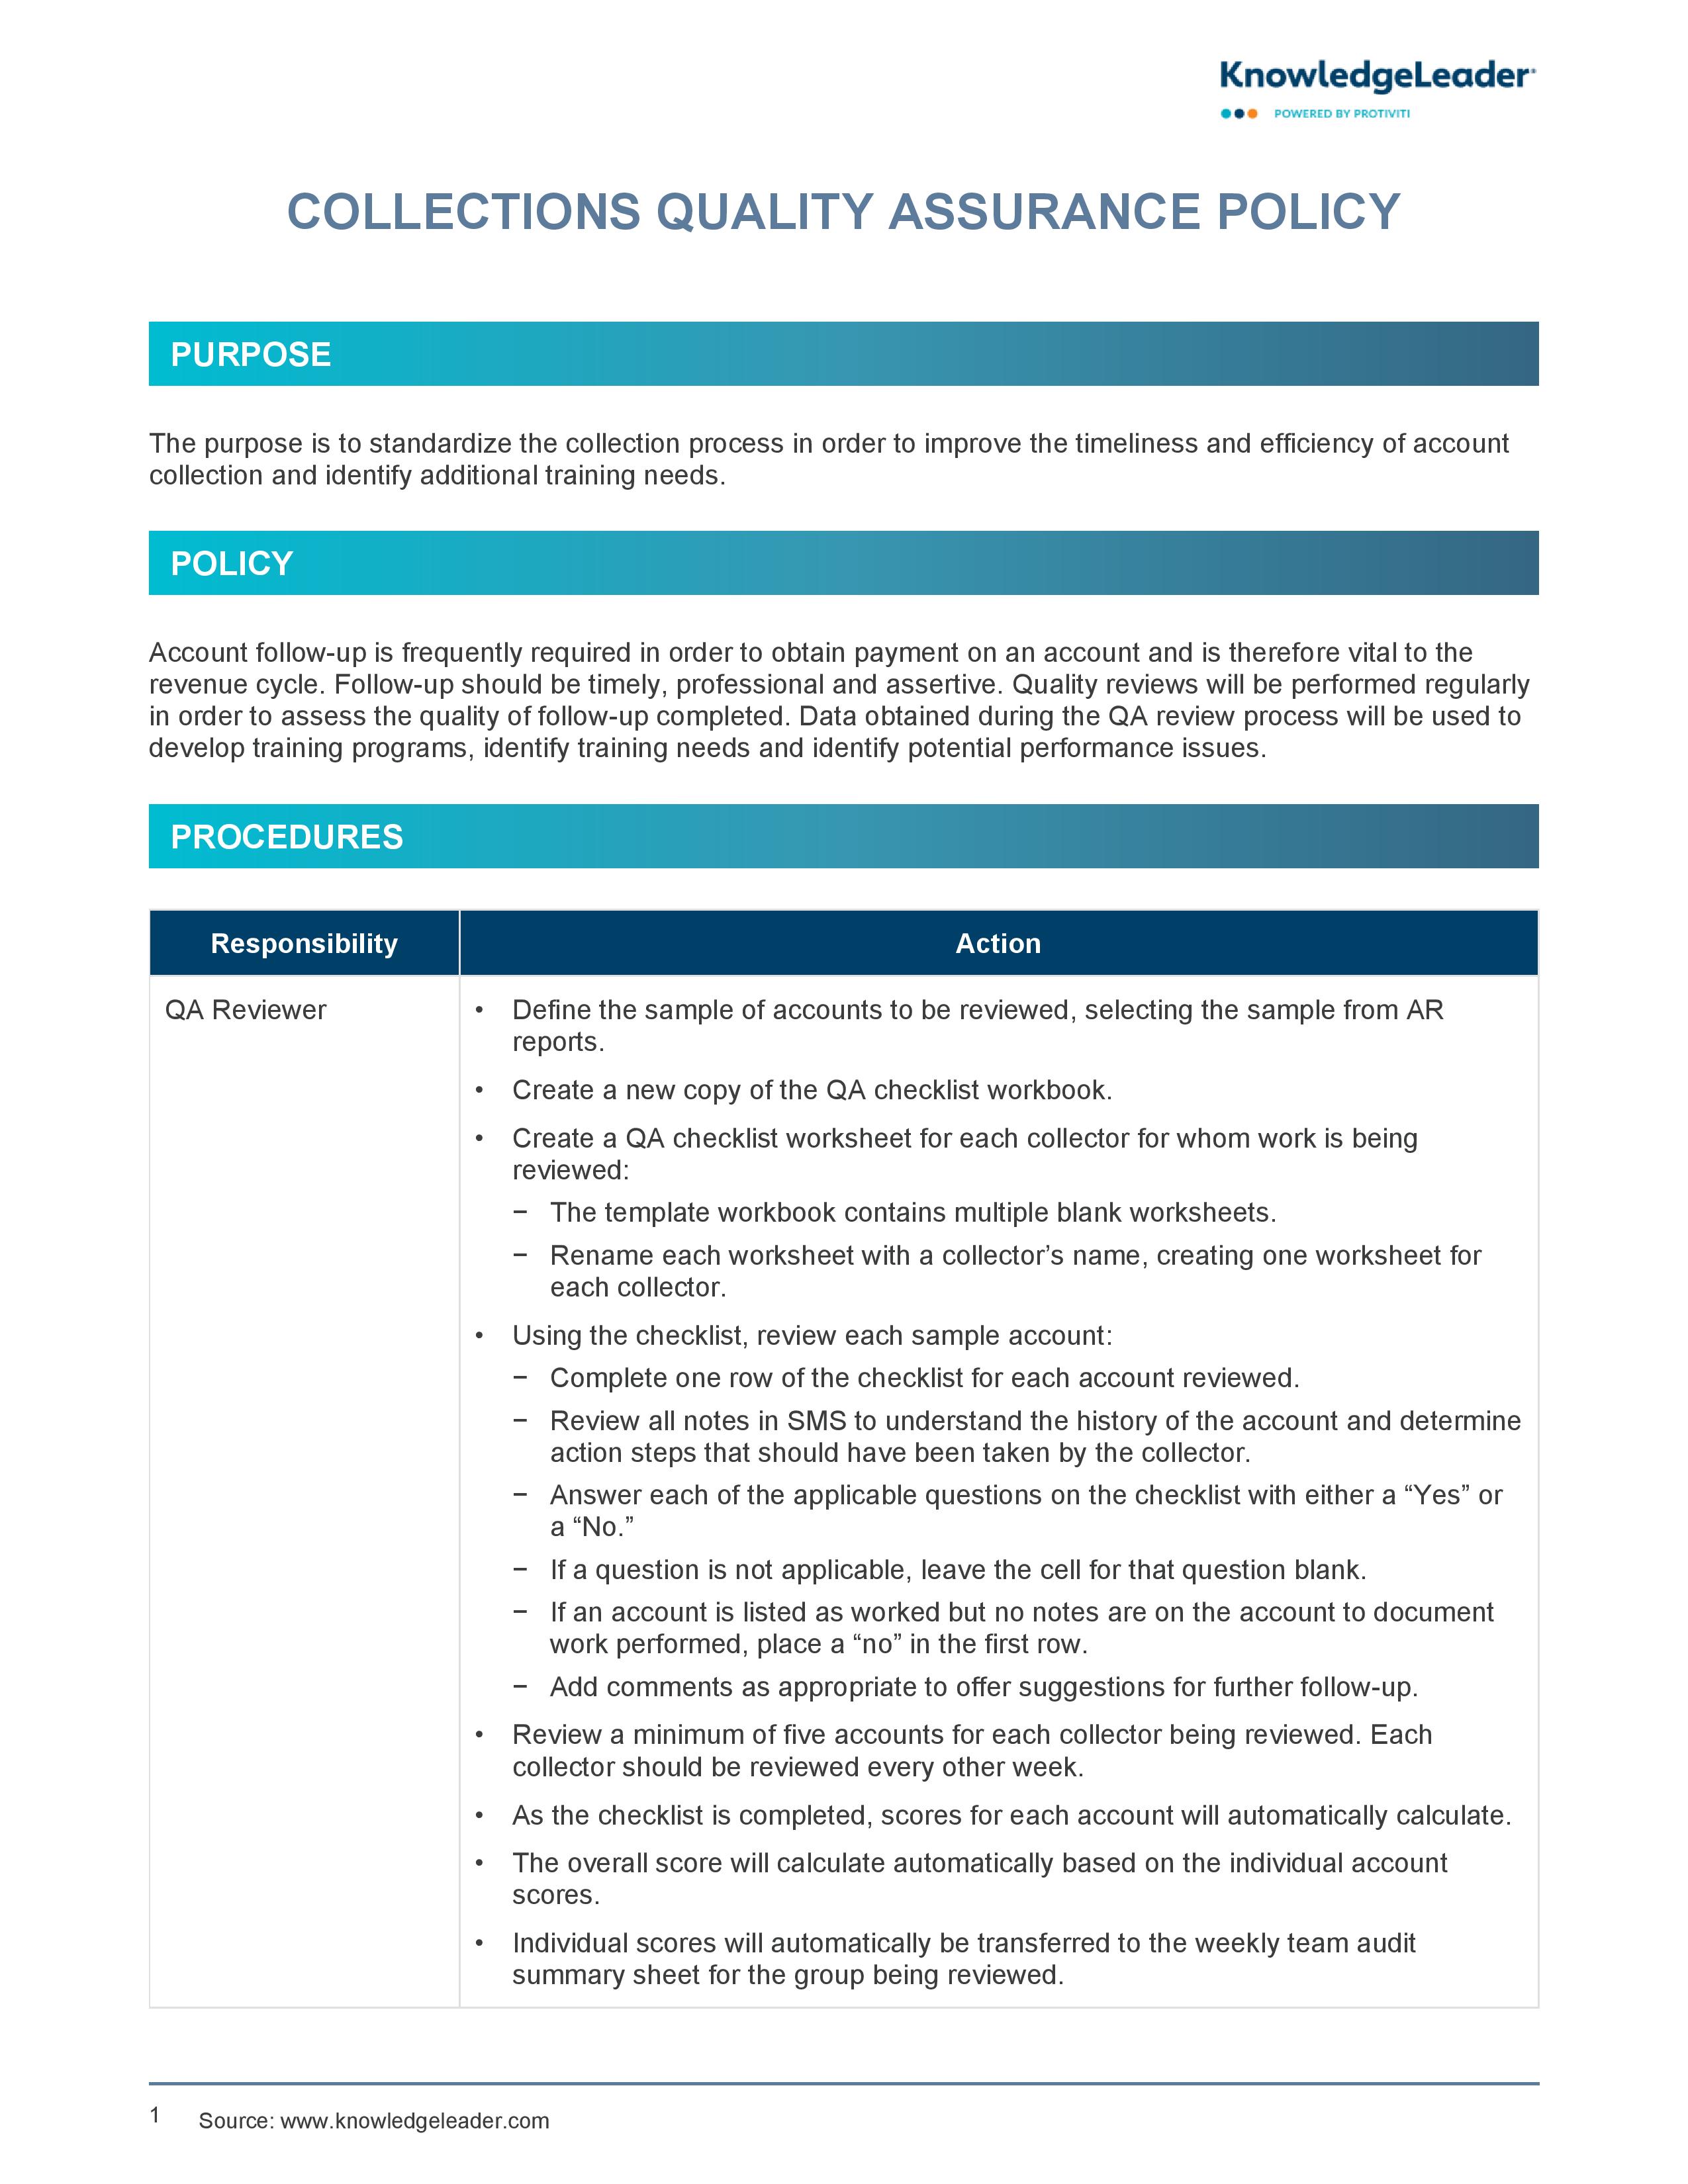 screenshot of the first page of Collections Quality Assurance Policy